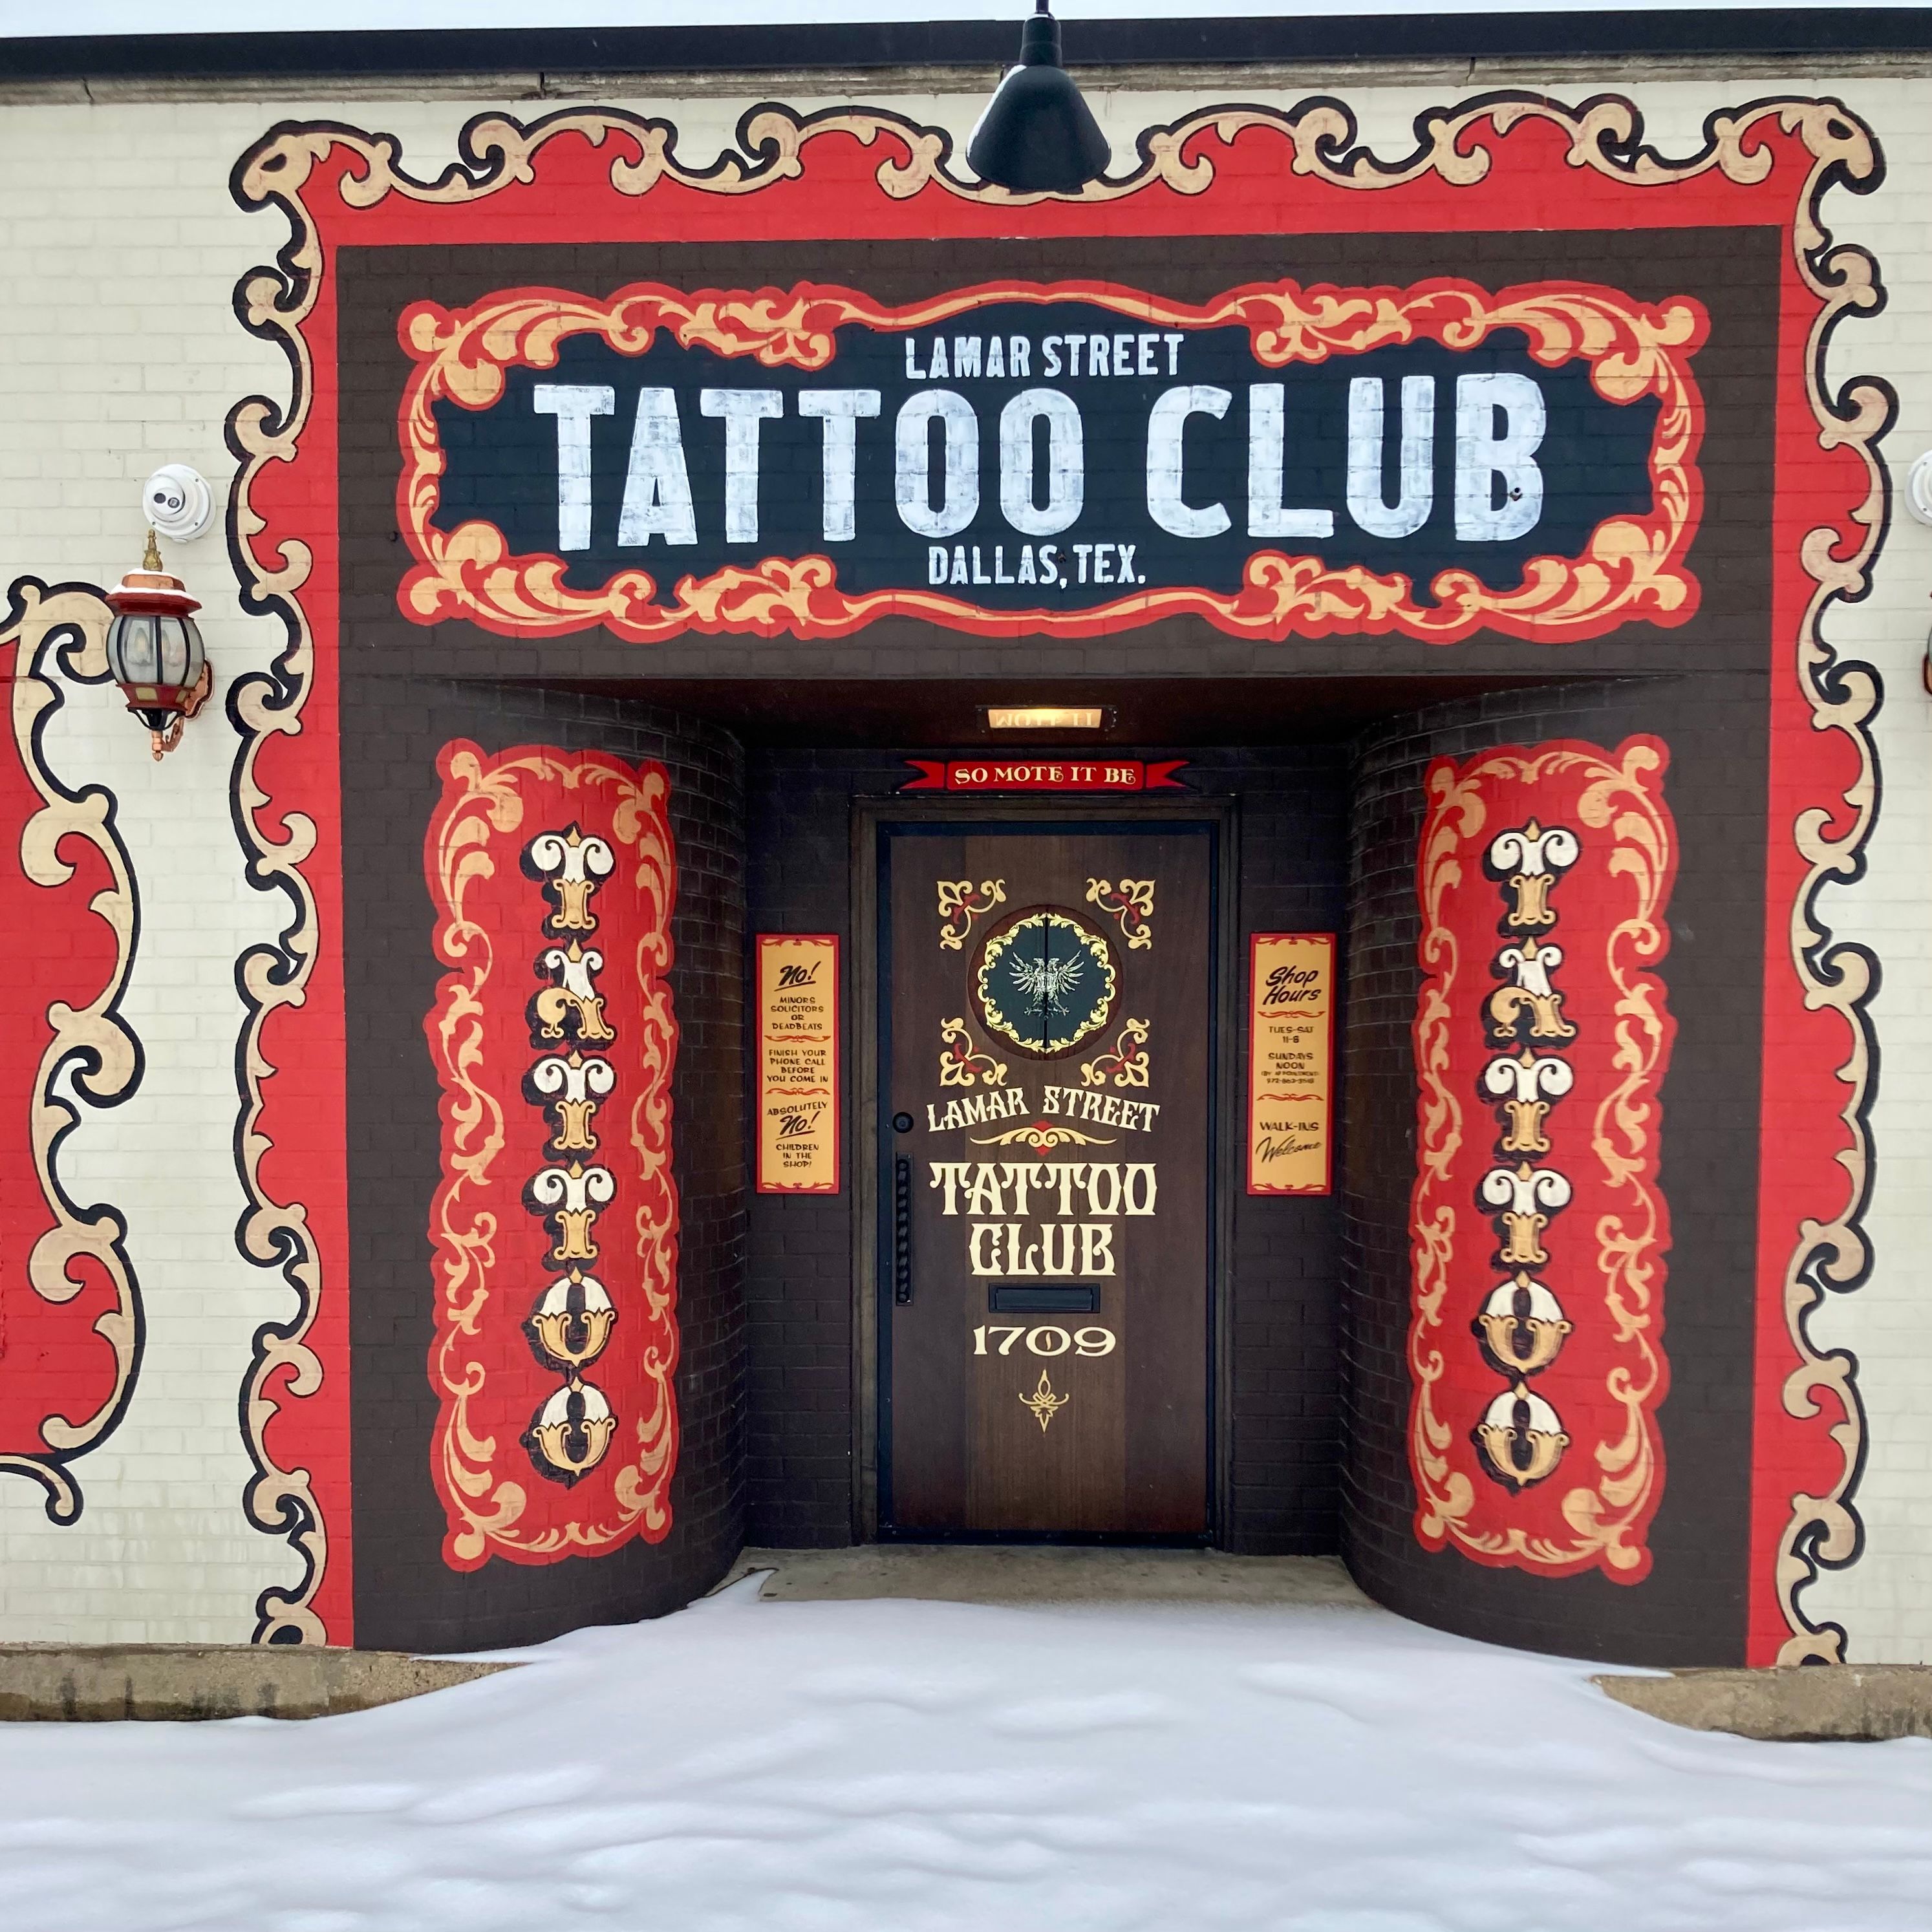 Our History — Ed Hardy's Tattoo City